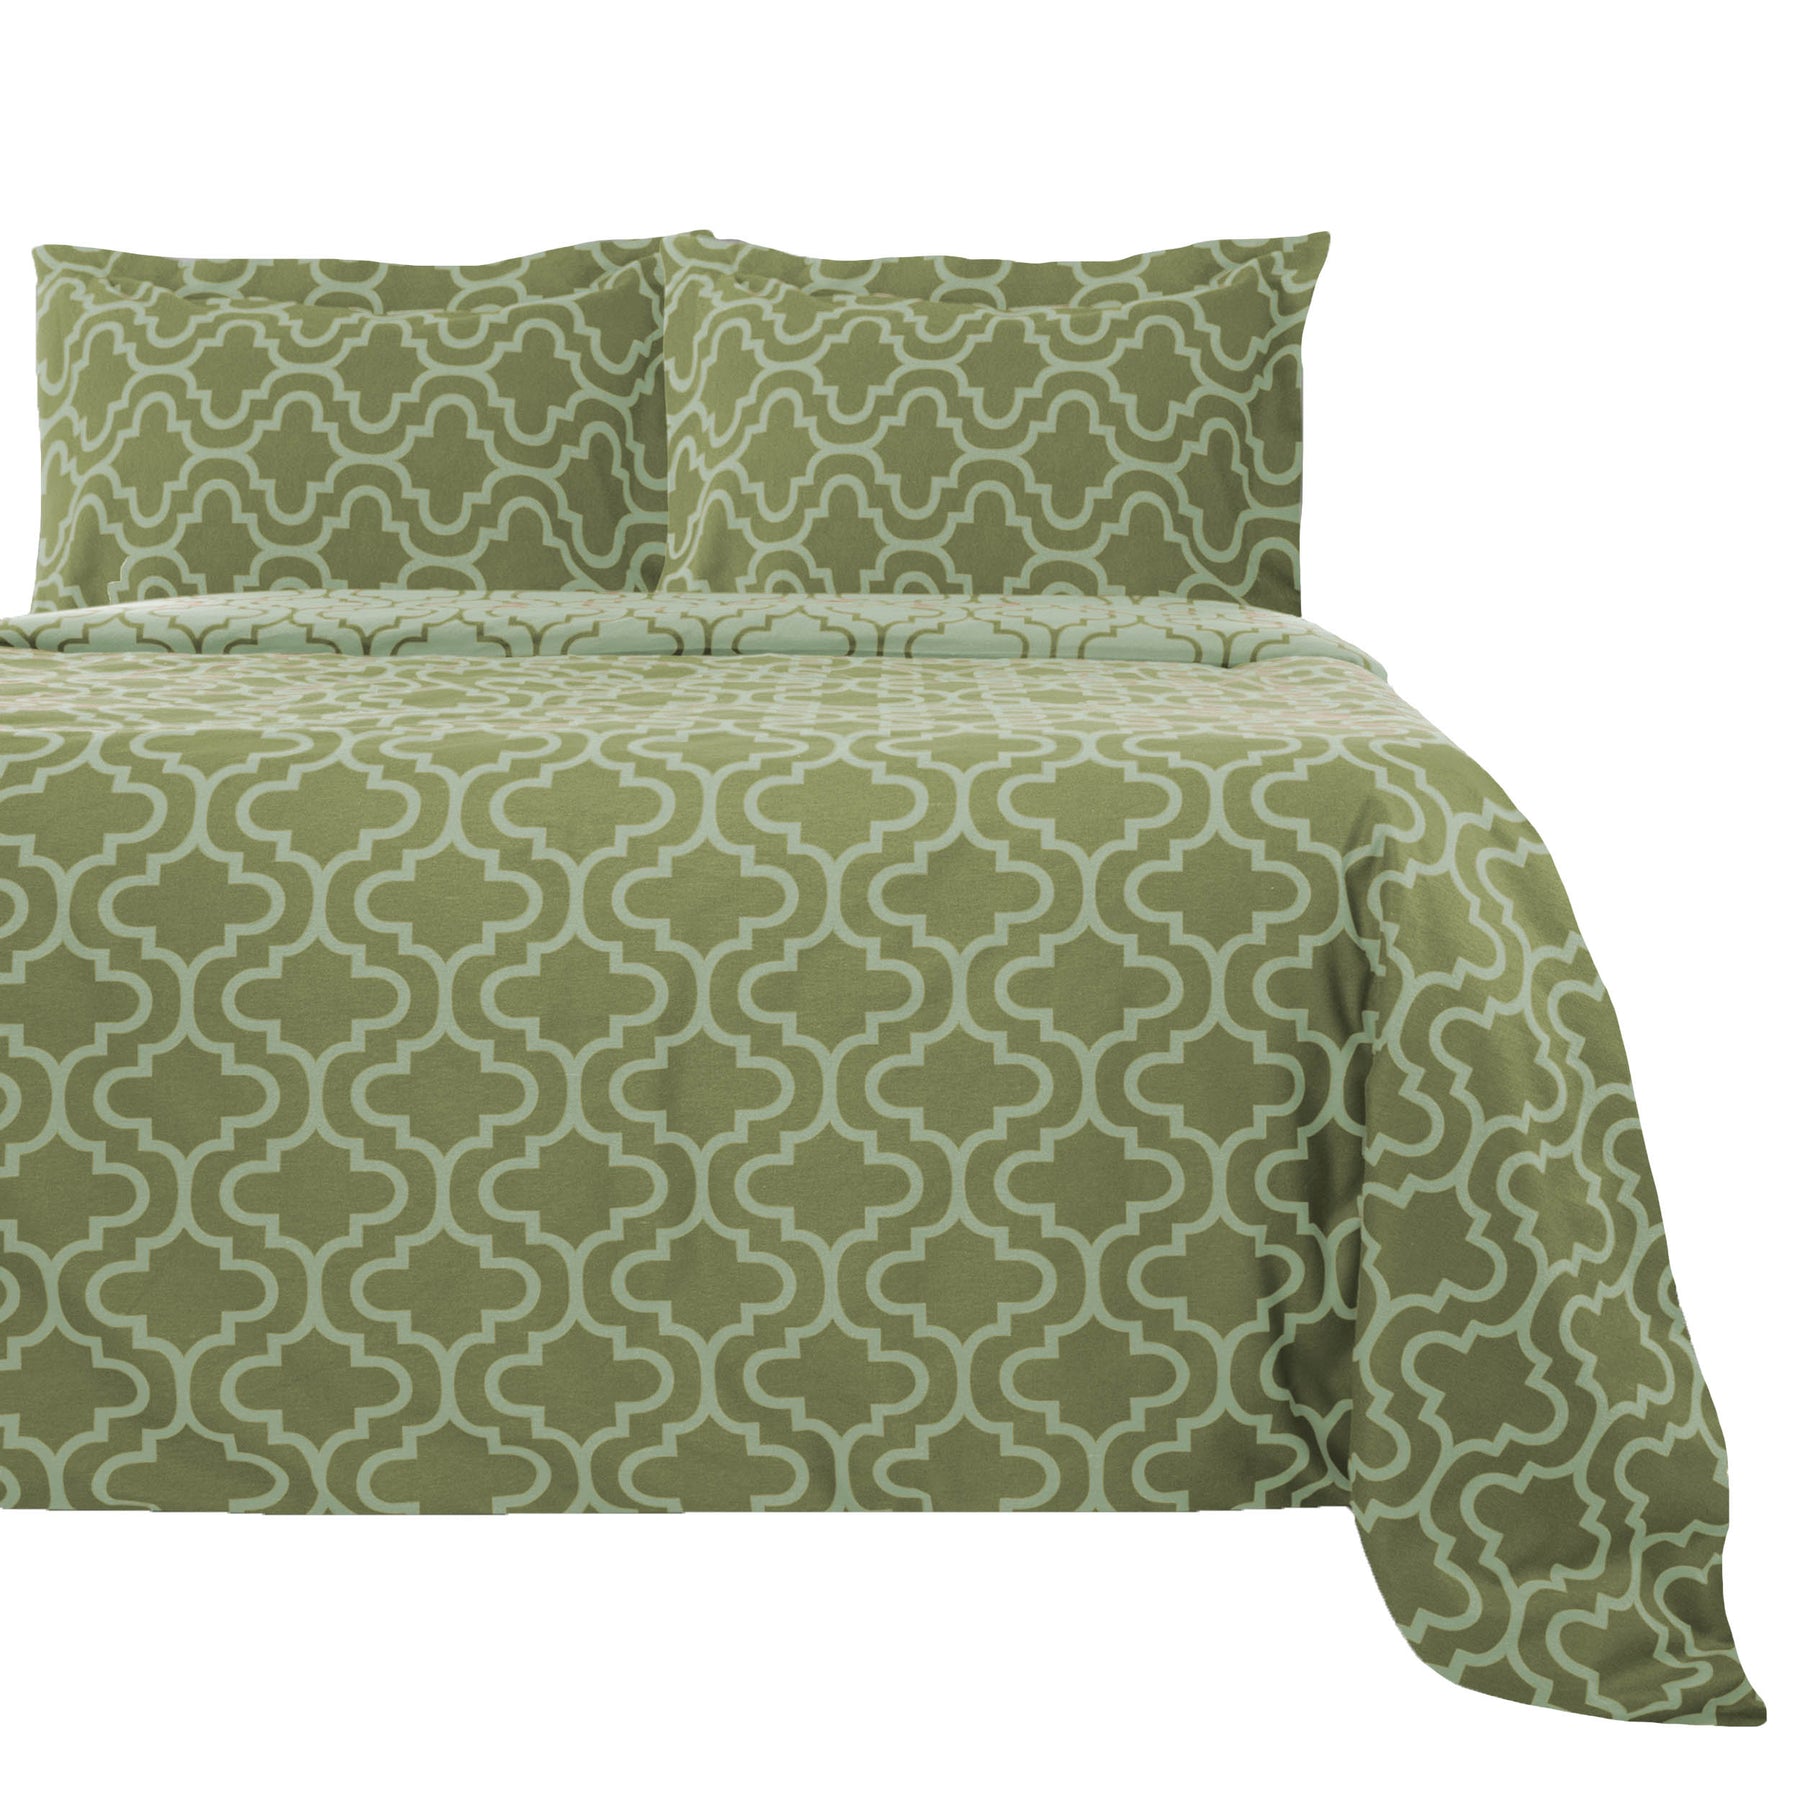 Superior Cotton Flannel Solid or Trellis Heavyweight and Breathable Duvet Cover Set with Button Closure - Sage